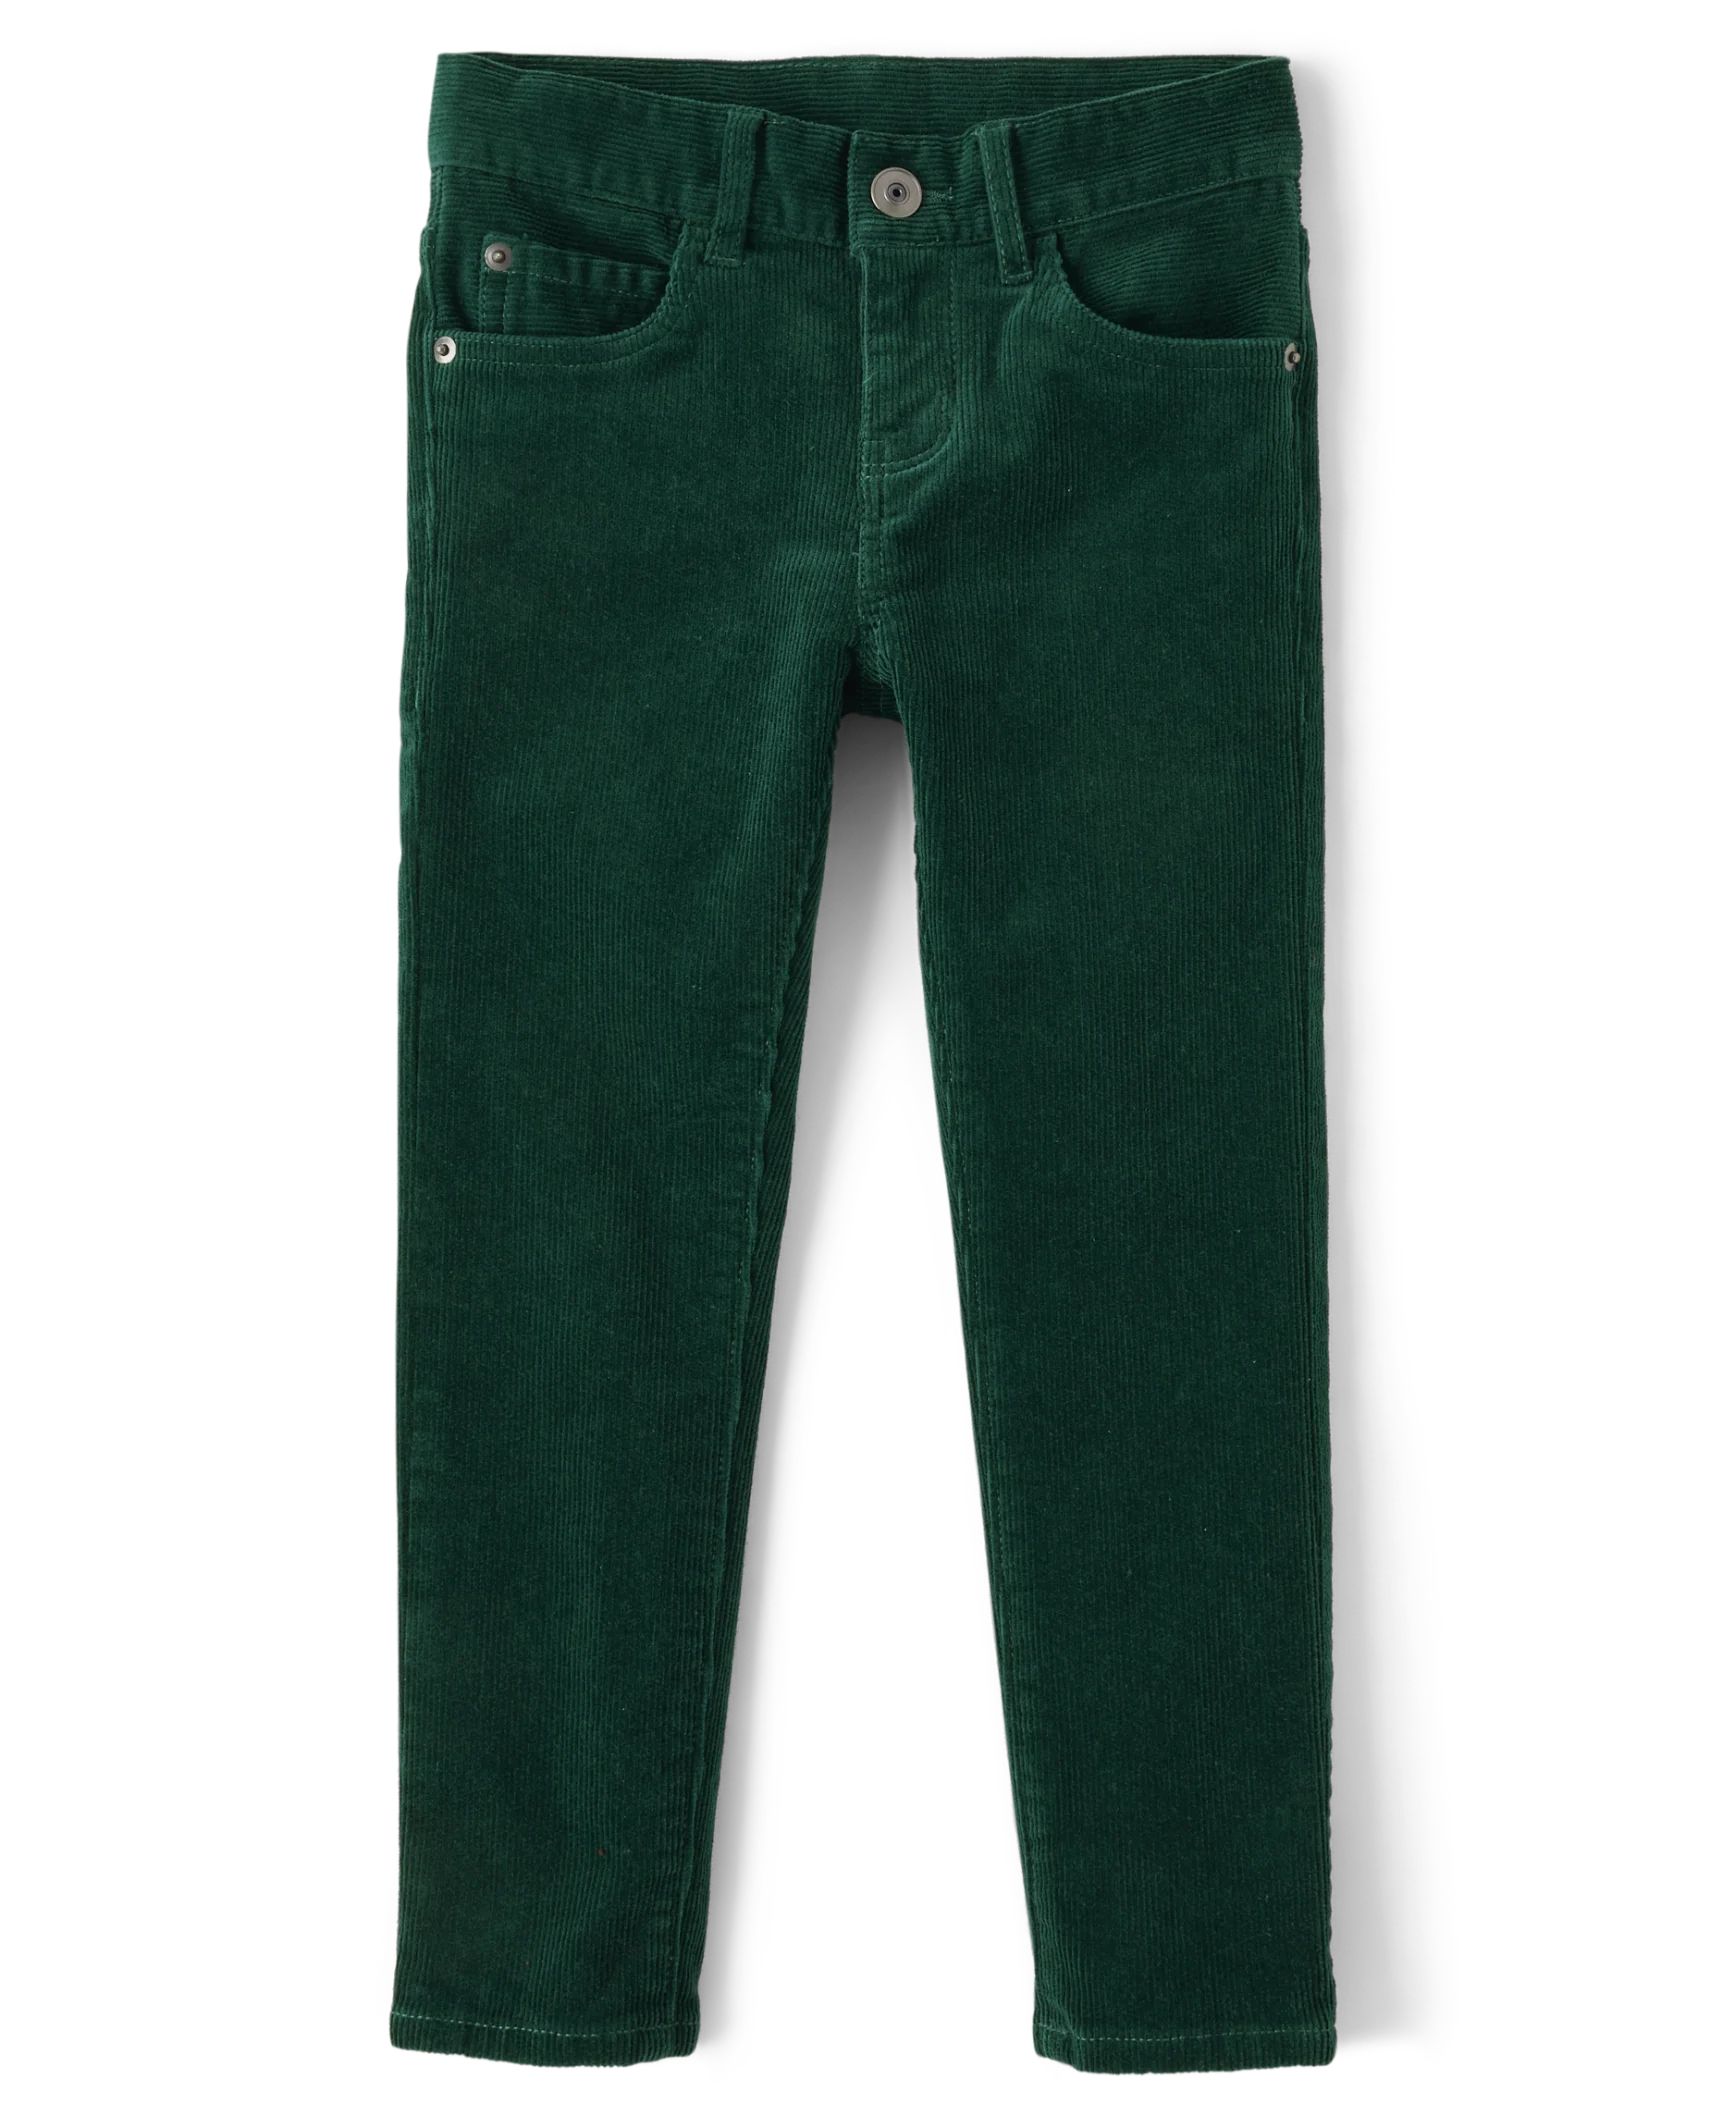 Boys Stretch Corduroy Pants - spruceshad | The Children's Place